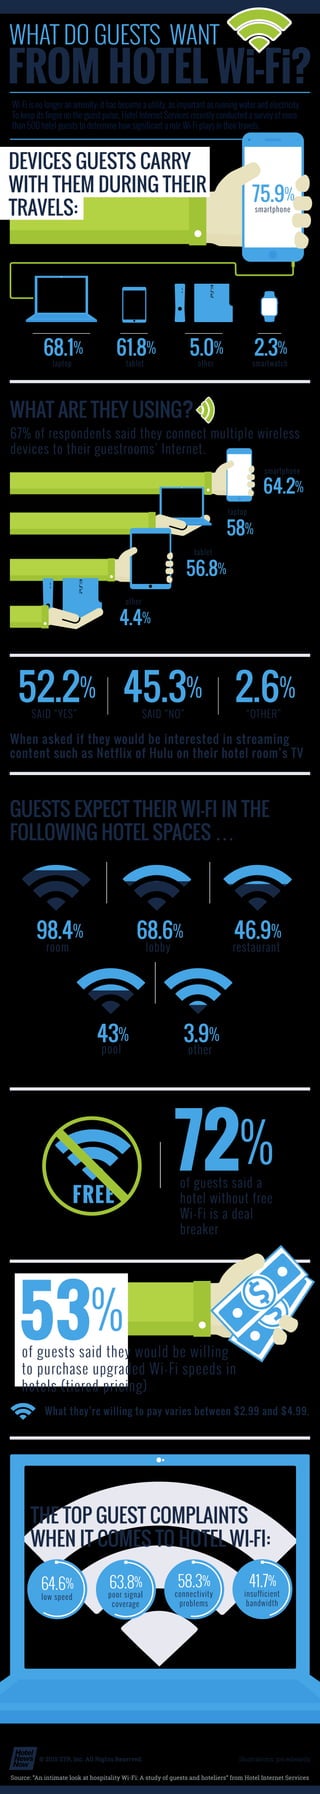 Wi-Fi is no longer an amenity; it has become a utility, as important as running water and electricity.
To keep its finger on the guest pulse, Hotel Internet Services recently conducted a survey of more
than 500 hotel guests to determine how significant a role Wi-Fi plays in their travels.
68.1% 61.8% 2.3%
laptop
75.9%
smartphone
5.0%
tablet other smartwatch
67% of respondents said they connect multiple wireless
devices to their guestrooms’ Internet.
64.2%
smartphone
58%
laptop
WHAT ARE THEY USING?
56.8%
tablet
4.4%
other
When asked if they would be interested in streaming
content such as Netflix of Hulu on their hotel room’s TV
SAID “YES” SAID “NO” “OTHER”
52.2% 45.3% 2.6%
GUESTS EXPECT THEIR WI-FI IN THE
FOLLOWING HOTEL SPACES …
room
98.4%
lobby
68.6%
restaurant
46.9%
pool
43%
other
3.9%
of guests said a
hotel without free
Wi-Fi is a deal
breaker
72%
FREE
53%
of guests said they would be willing
to purchase upgraded Wi-Fi speeds in
hotels (tiered pricing)
What they’re willing to pay varies between $2.99 and $4.99.
THE TOP GUEST COMPLAINTS
WHEN IT COMES TO HOTEL WI-FI:
low speed
64.6%
poor signal
coverage
63.8%
connectivity
problems
58.3%
insufficient
bandwidth
41.7%
© 2015 STR, Inc. All Rights Reserved. illustrations: jon edwards
DEVICES GUESTS CARRY
WITH THEM DURING THEIR
TRAVELS:
Source: “An intimate look at hospitality Wi-Fi: A study of guests and hoteliers” from Hotel Internet Services
 